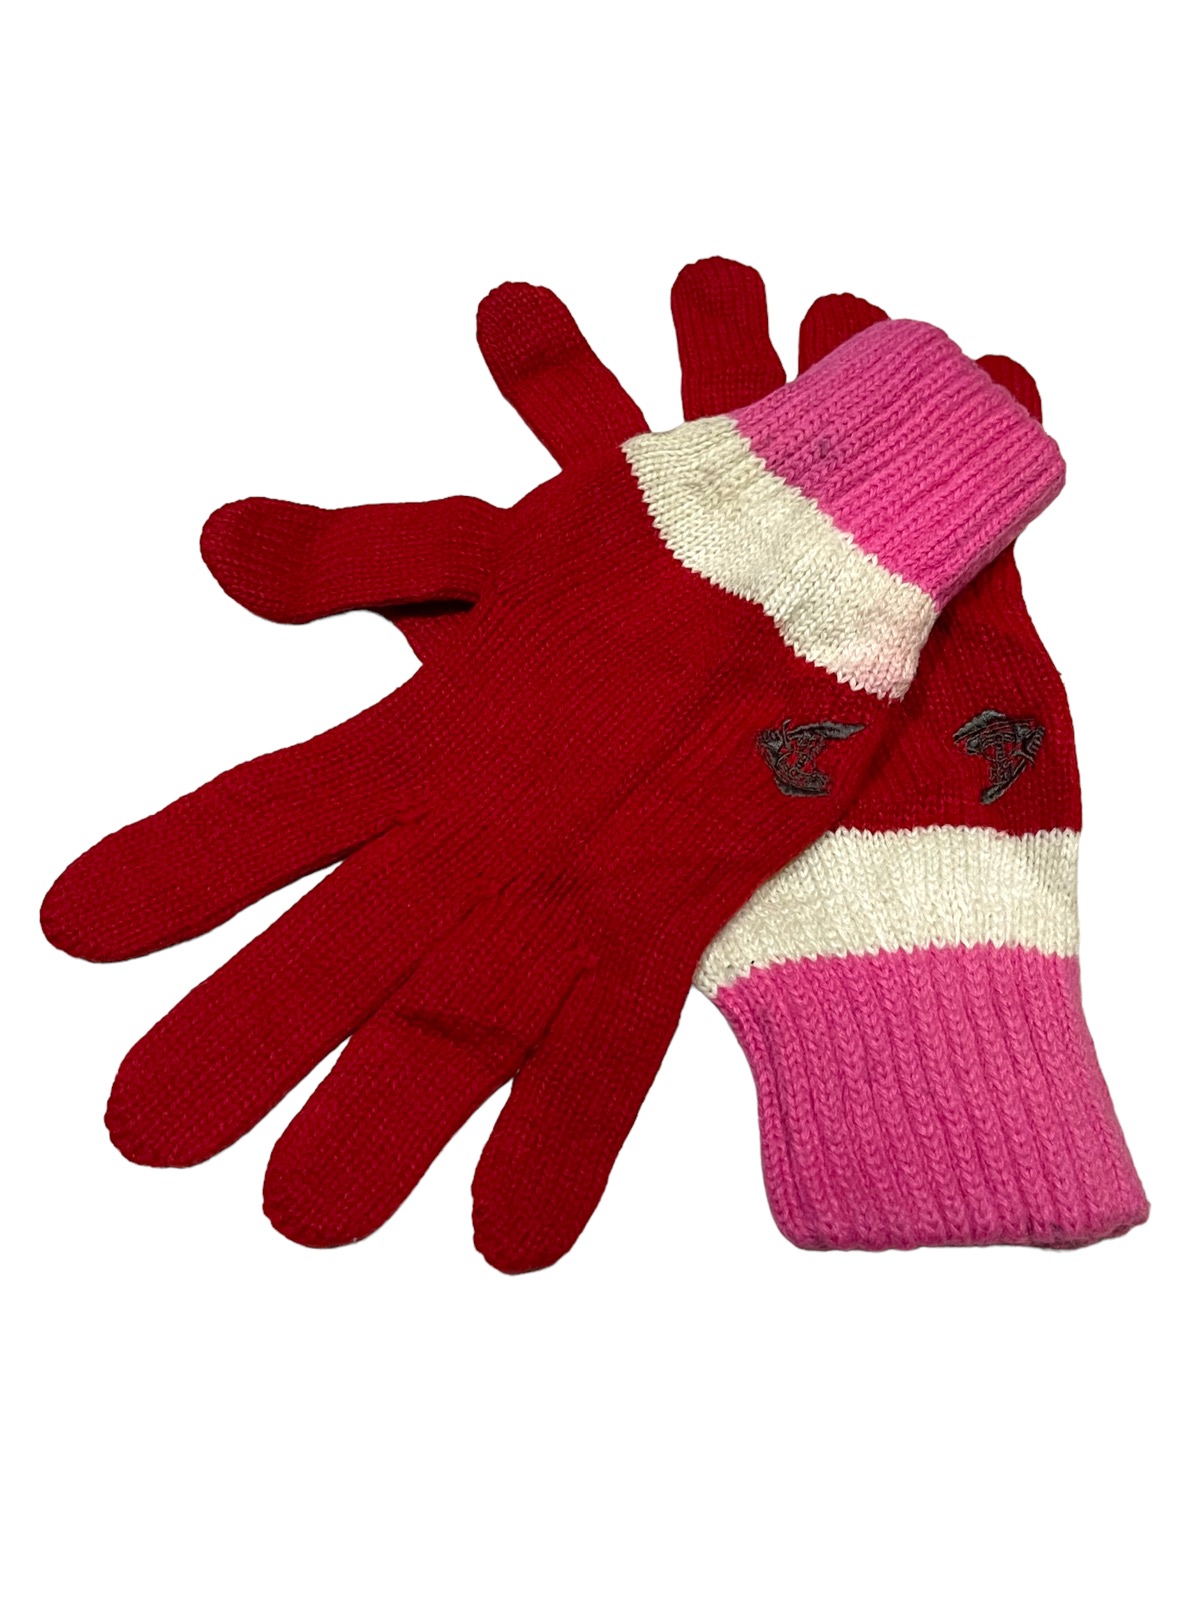 Vivienne Westwood Anglomania Gloves - 7